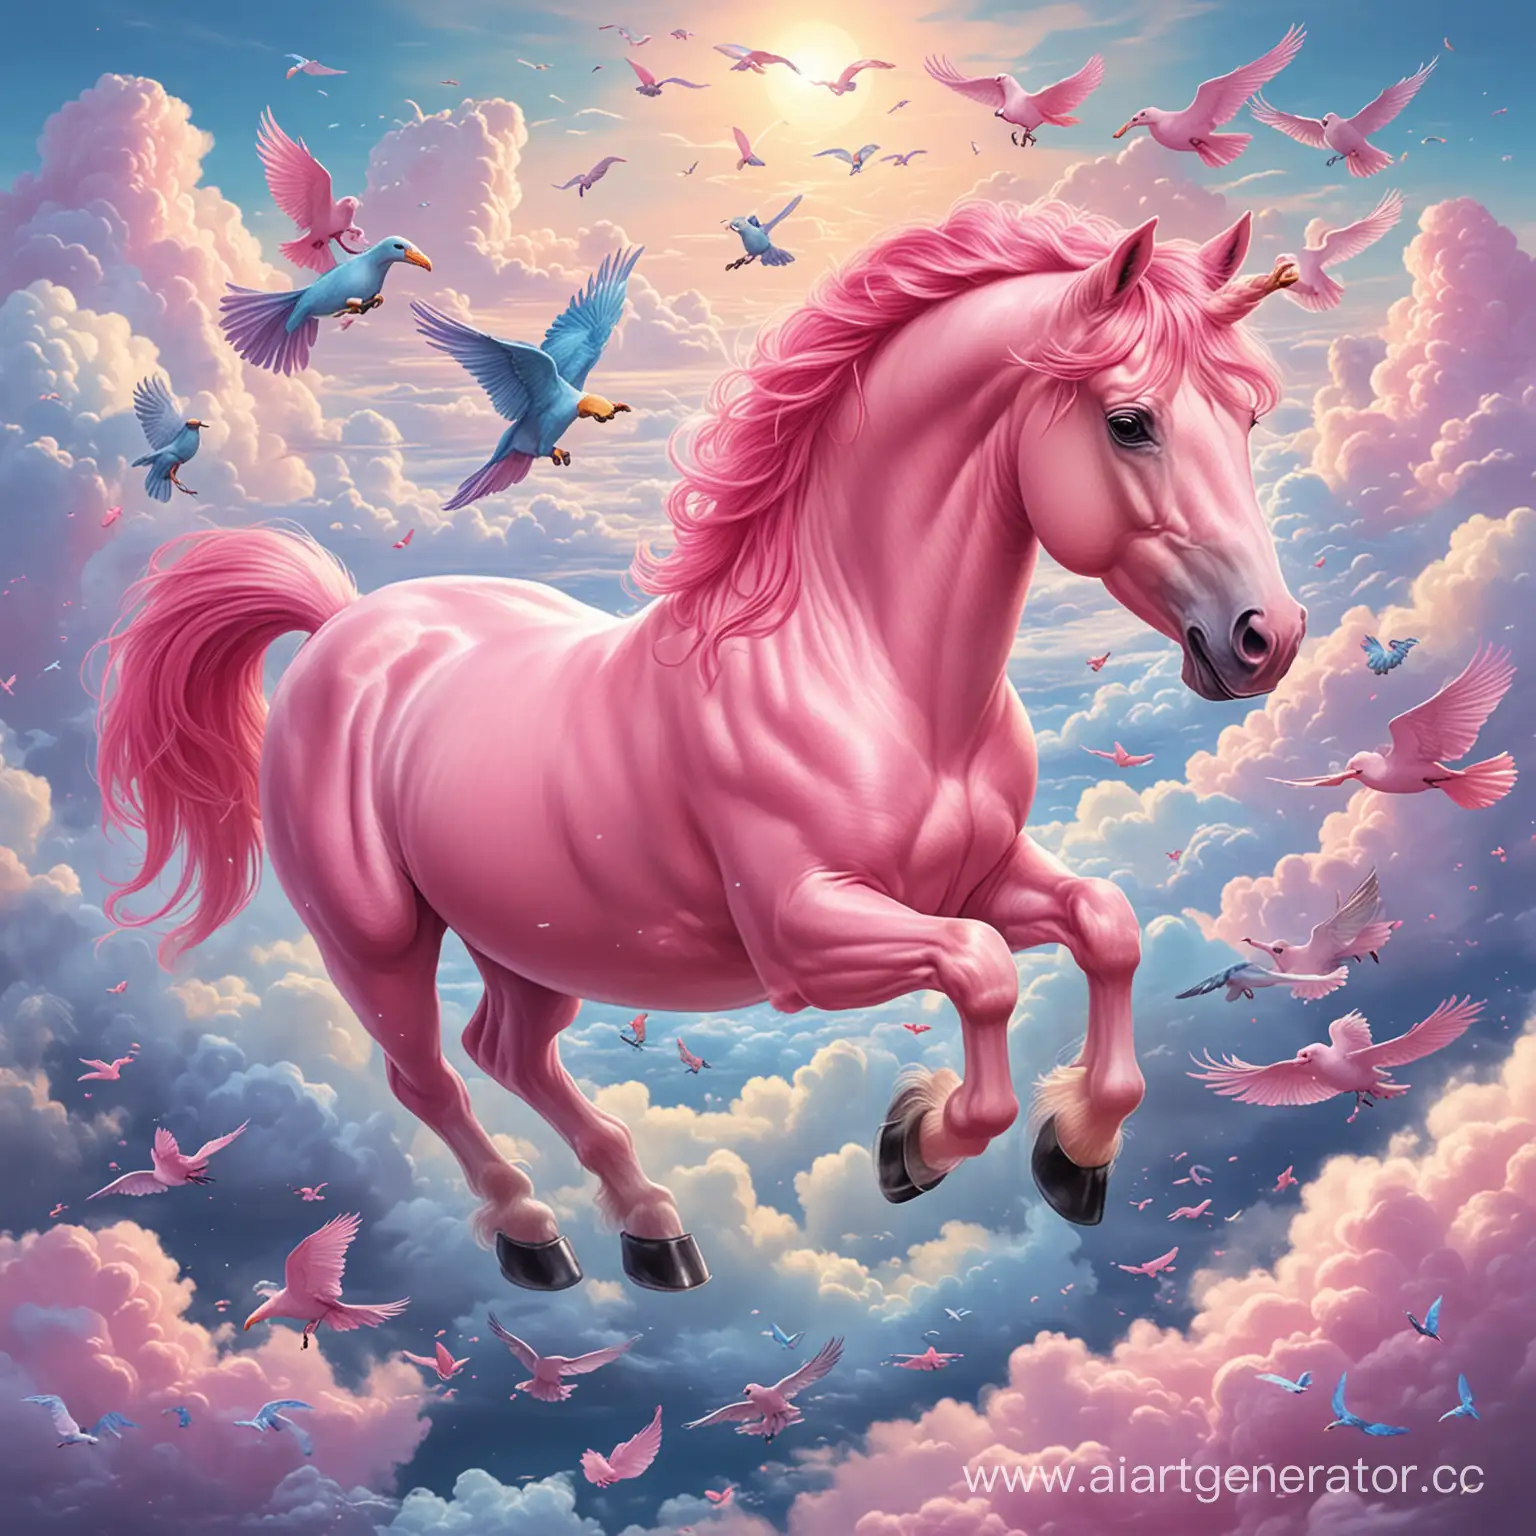 Dreamy-Pink-Pony-Floating-Among-Majestic-Birds-in-Clouds